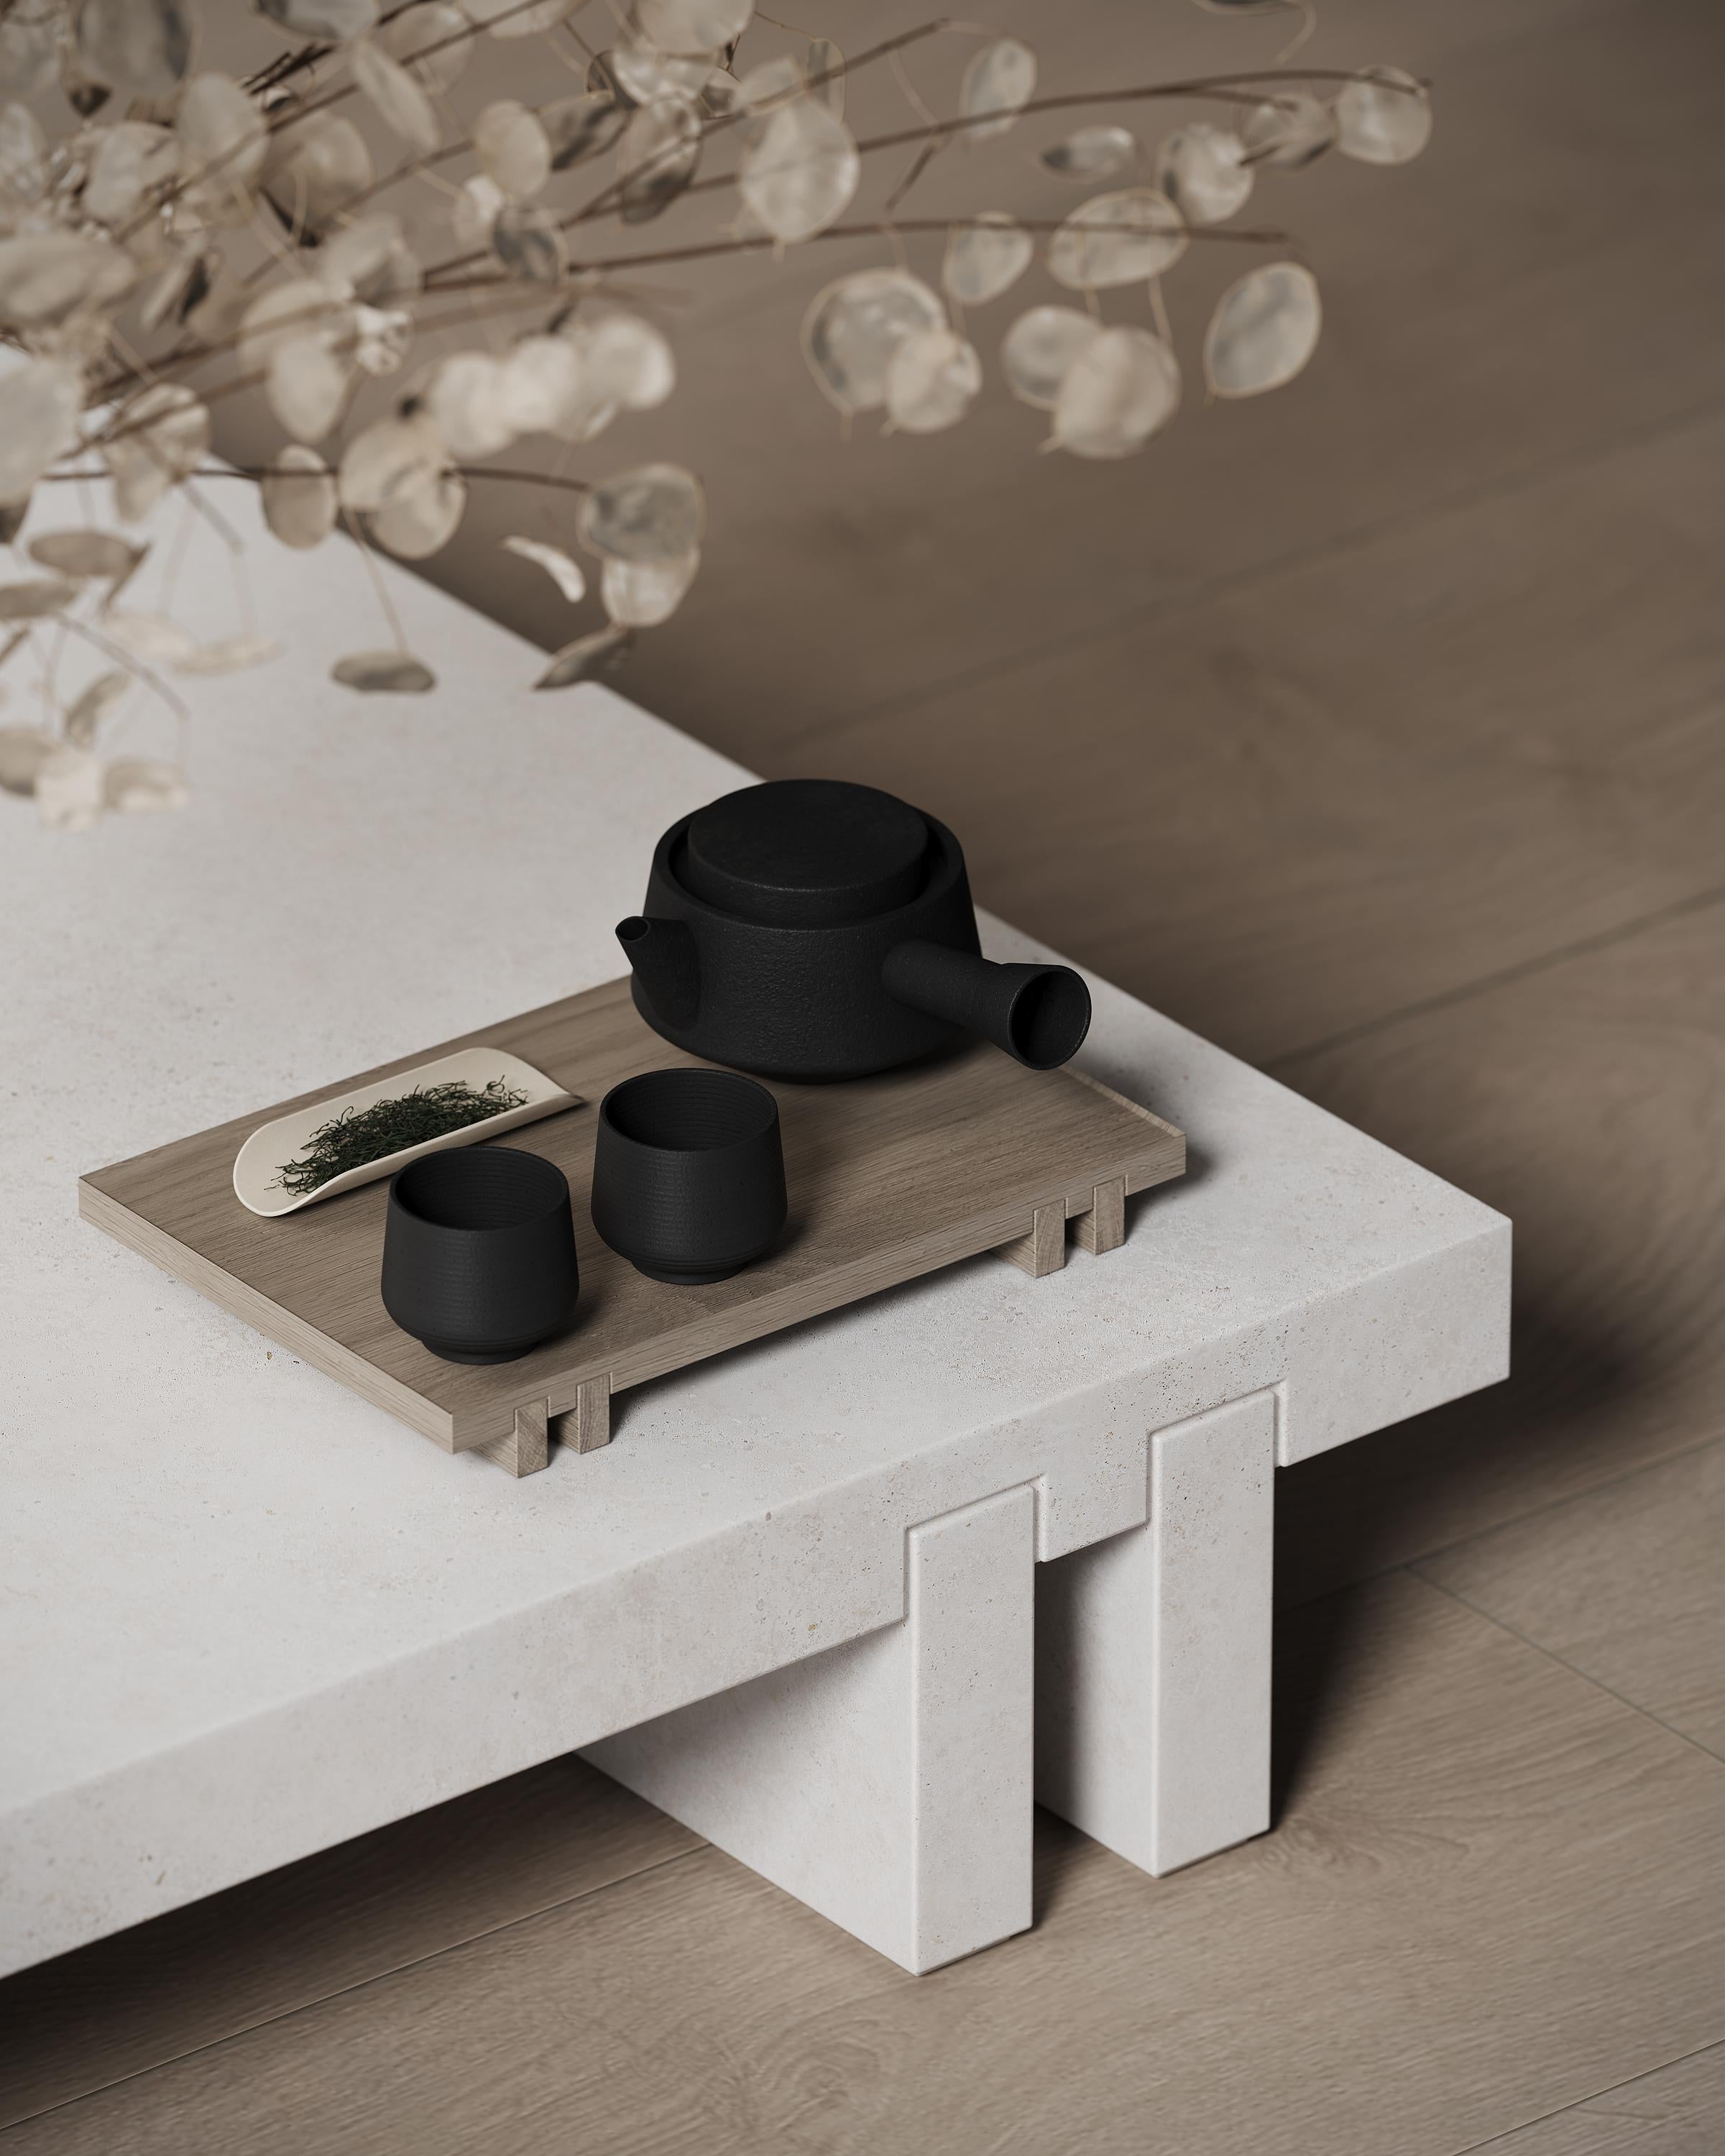 The Straia tray is the first element of our Articles Collection. These articles are intended to enhance daily routines by beautifying the most mundane activities. The tray is an extension of the Intersekt line, approached in small scale. Following